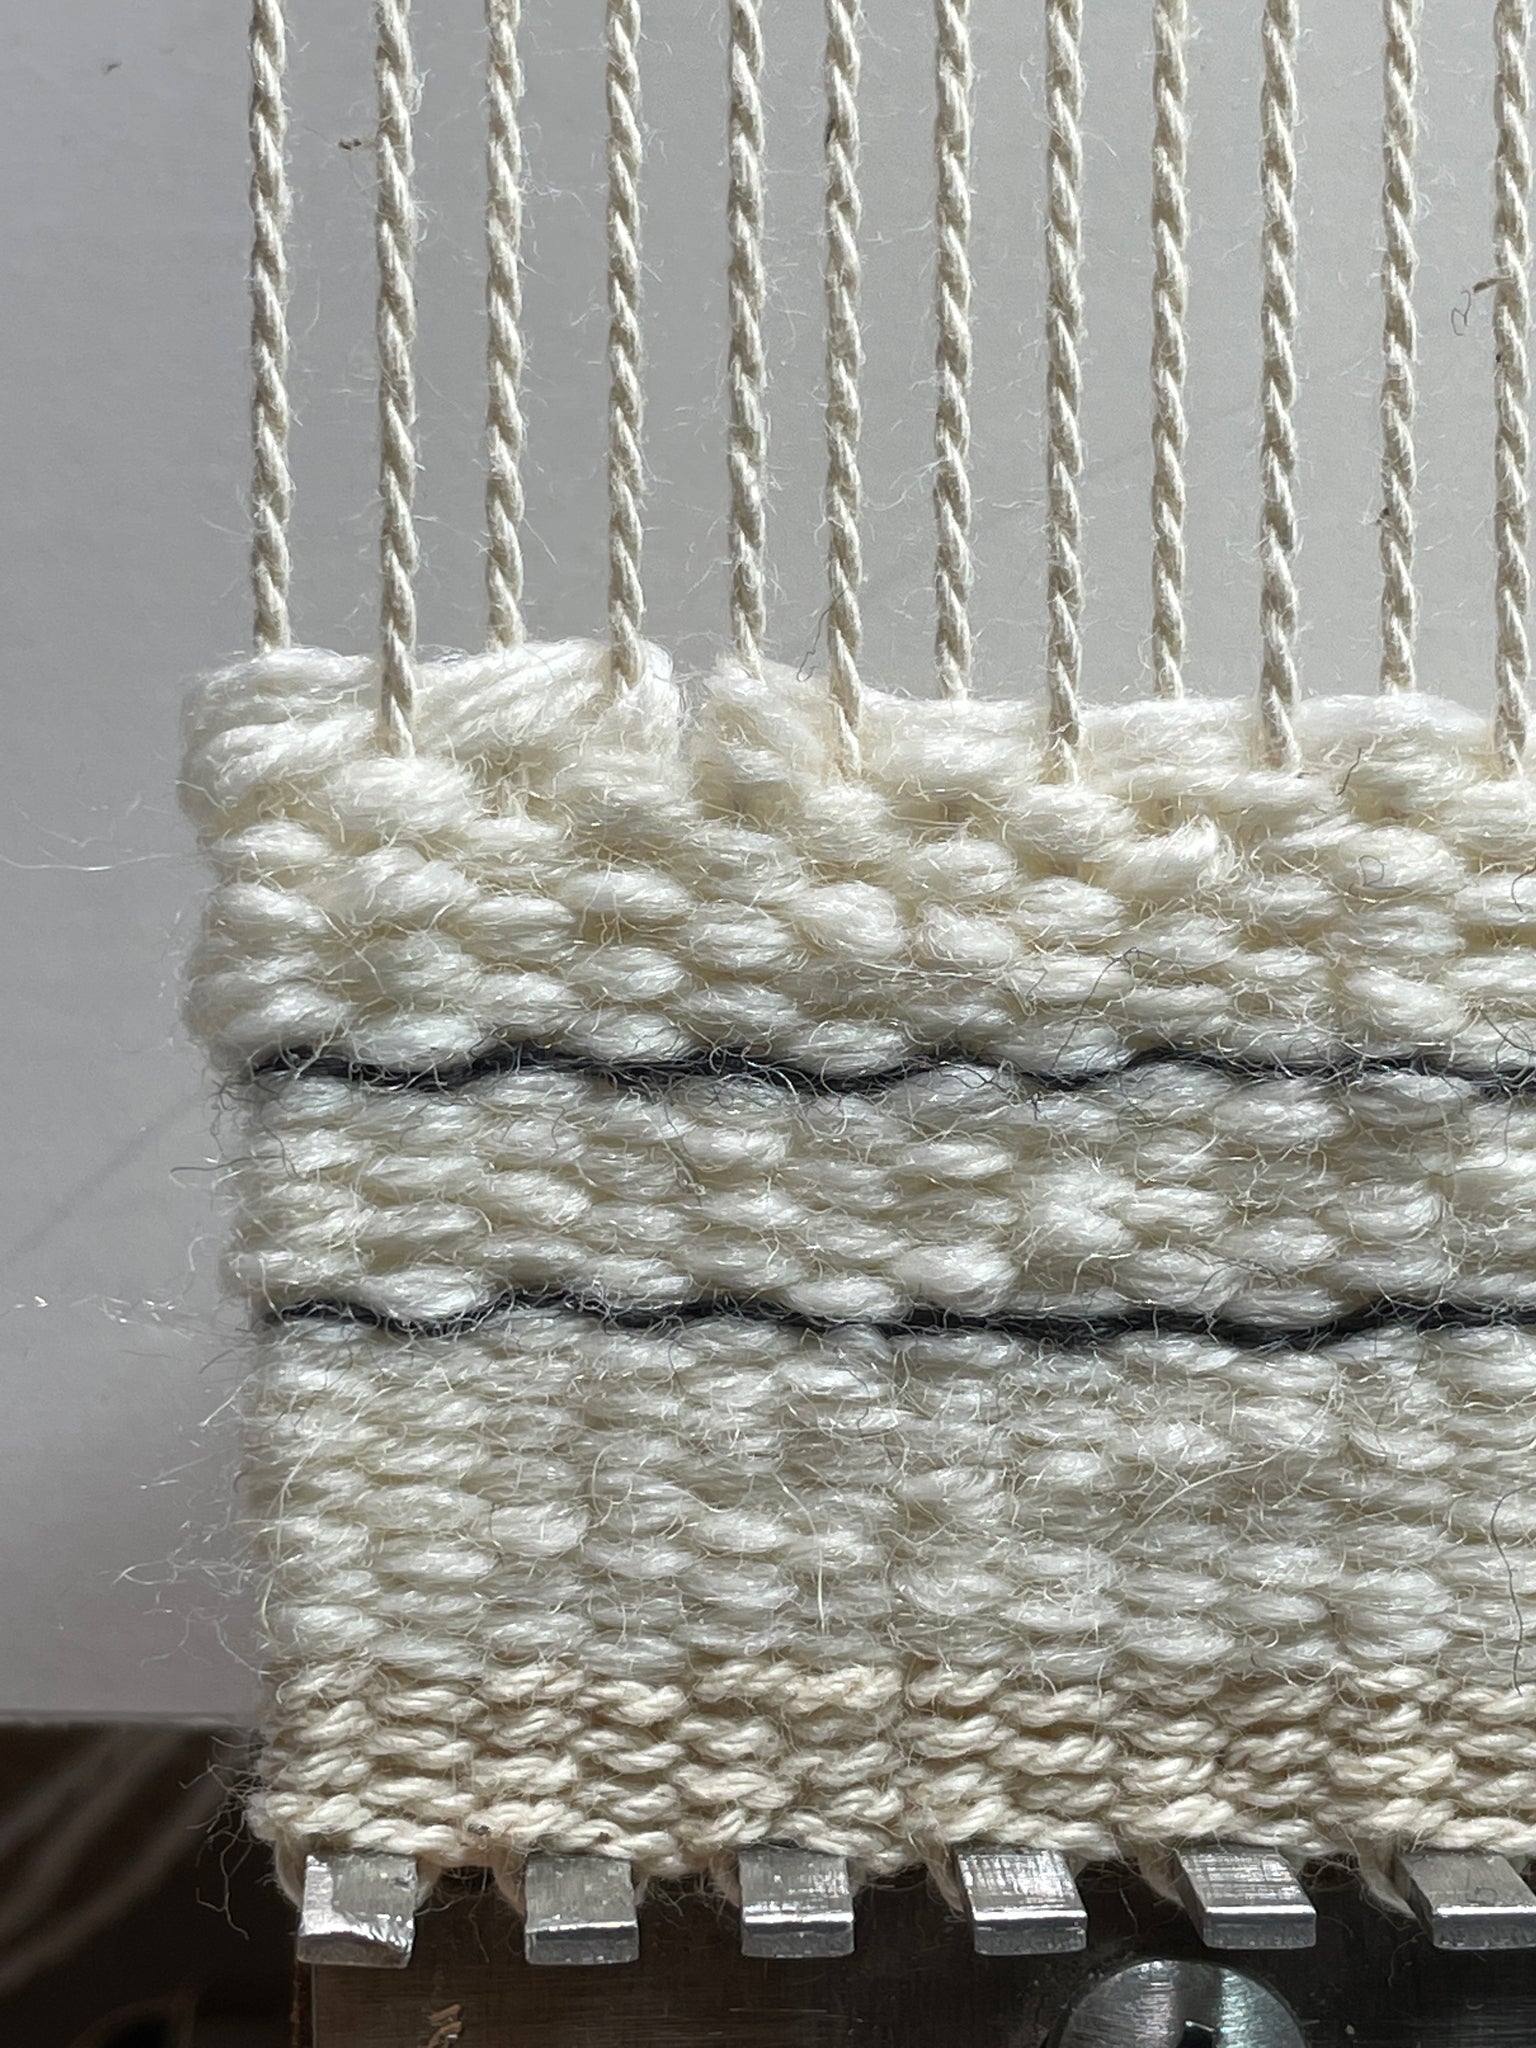 Exploring Images for Tapestry Weaving with Array - Gist Yarn